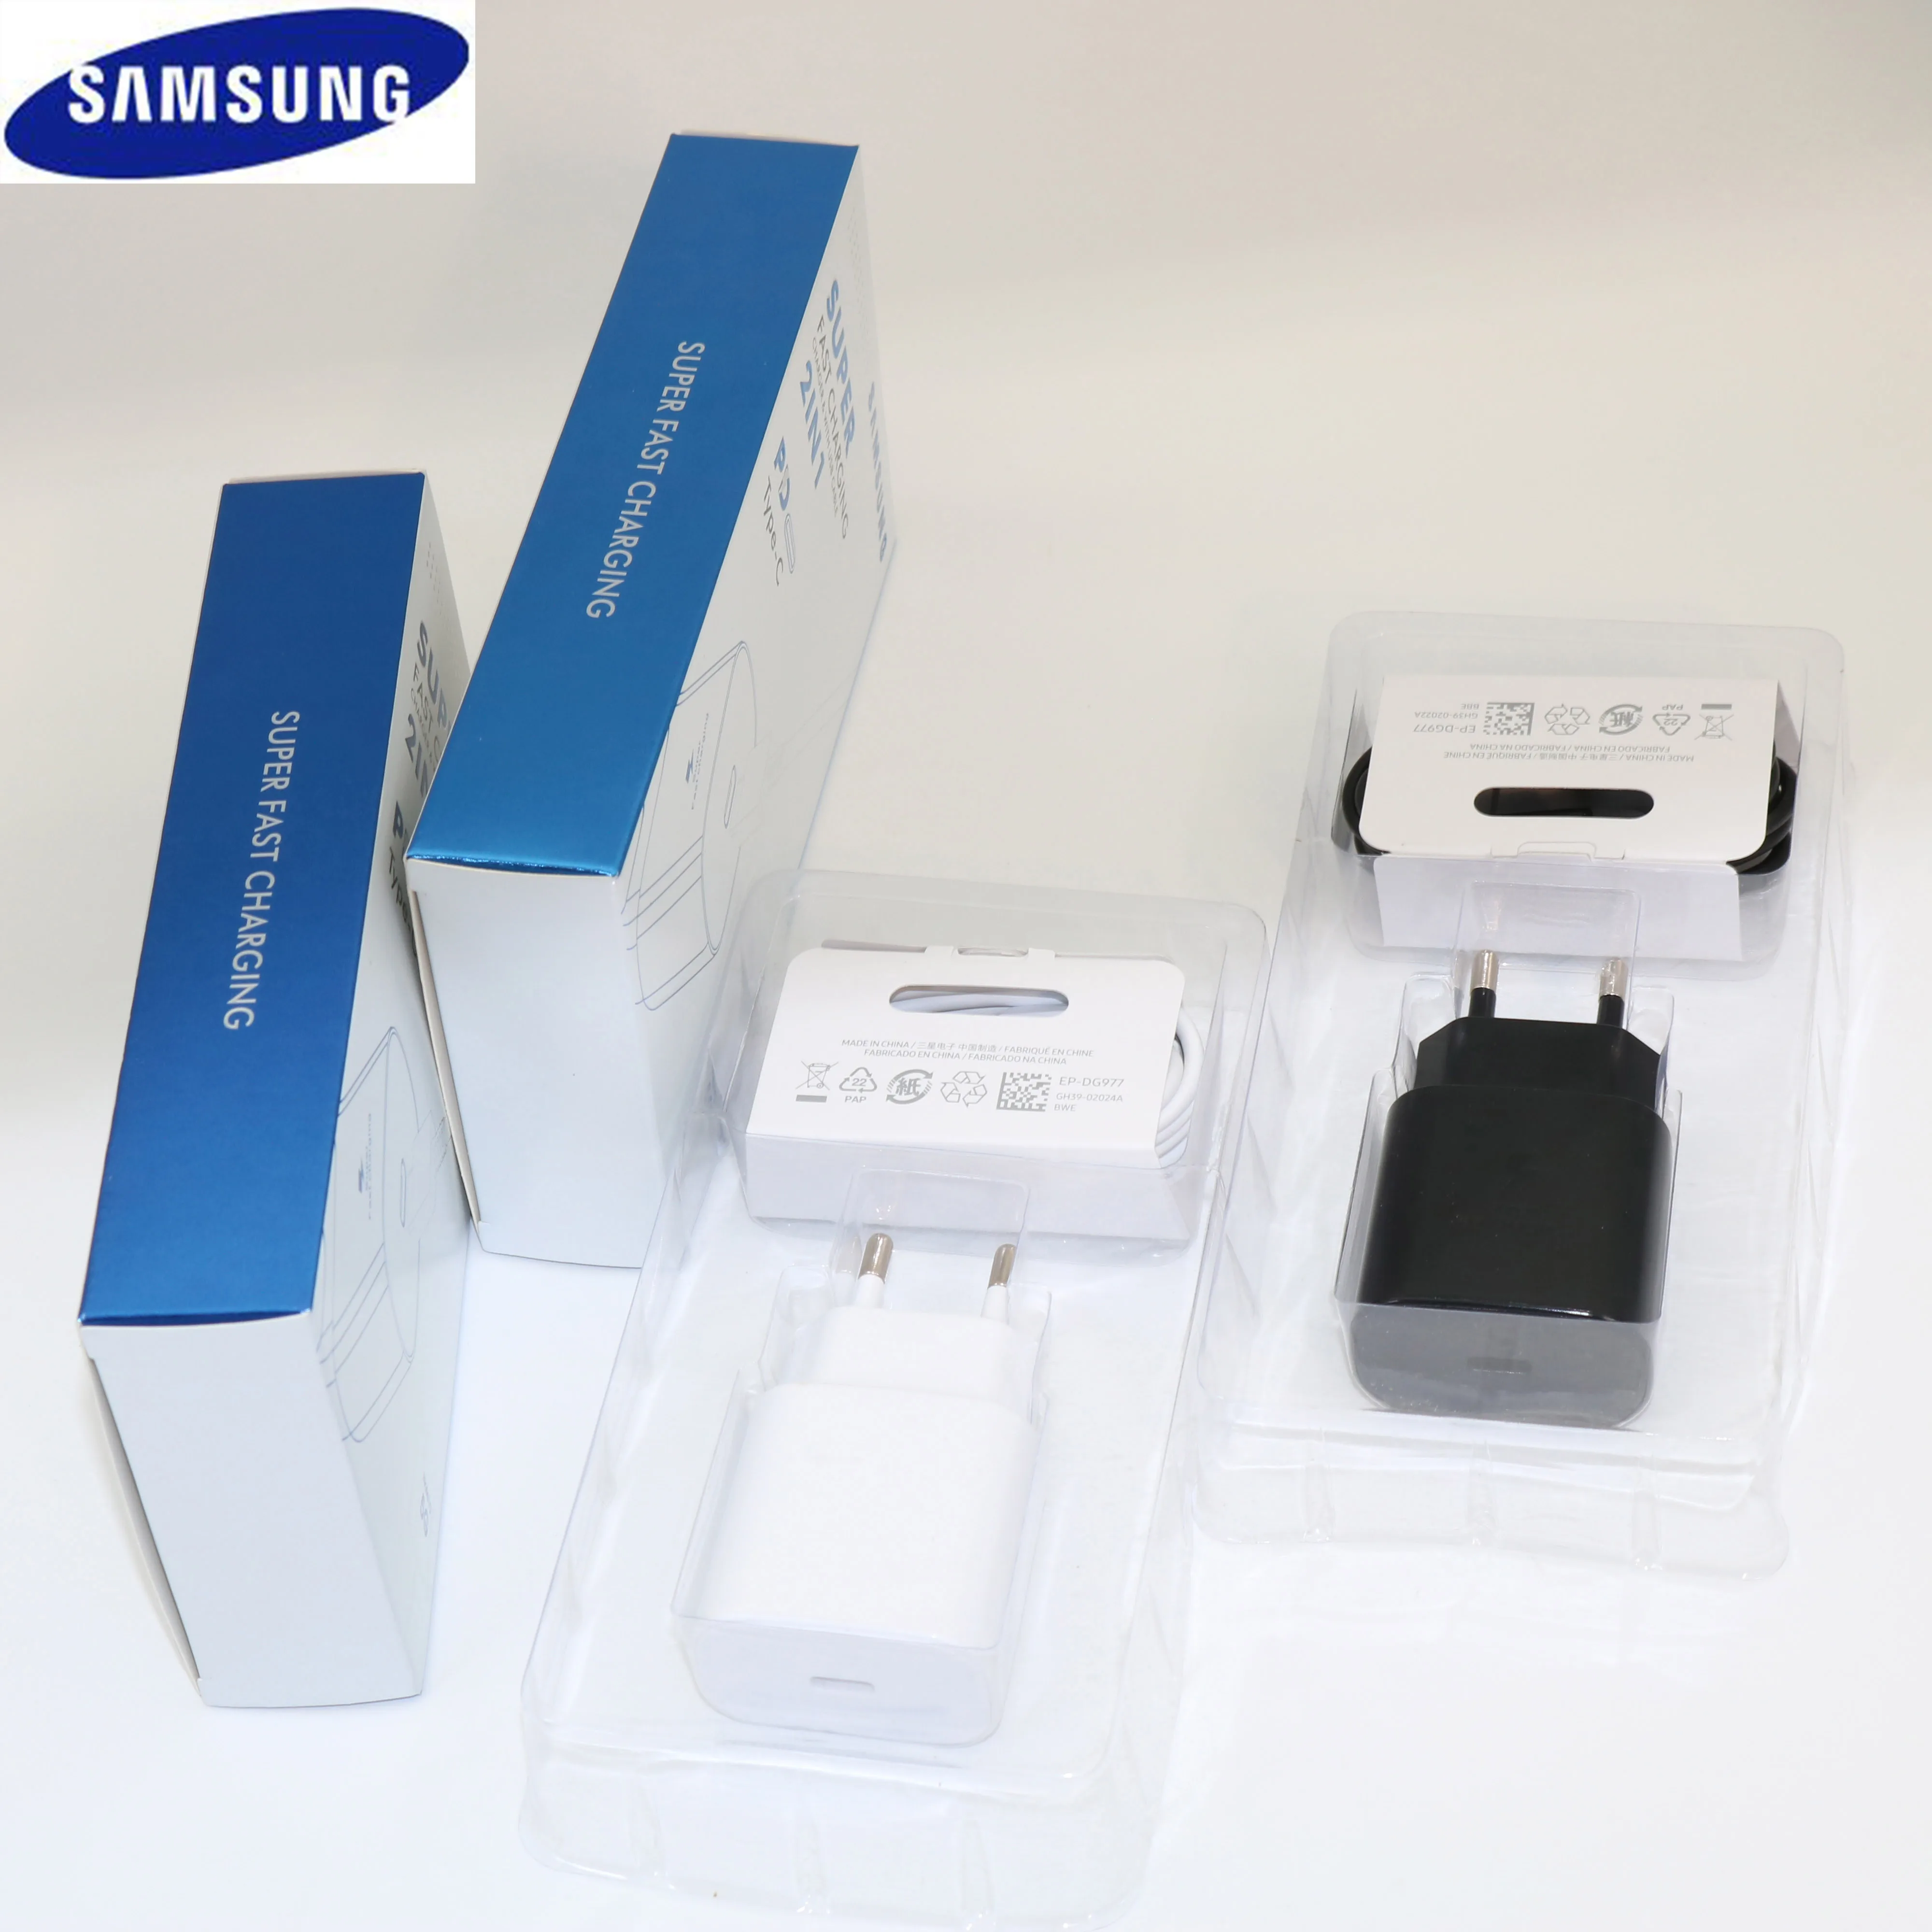 

Samsung Note 10 plus MobilePhone super fast charger 25 w Travel Usb PD PSS Fast Charge Adapter For Galaxy Note 10+ s10